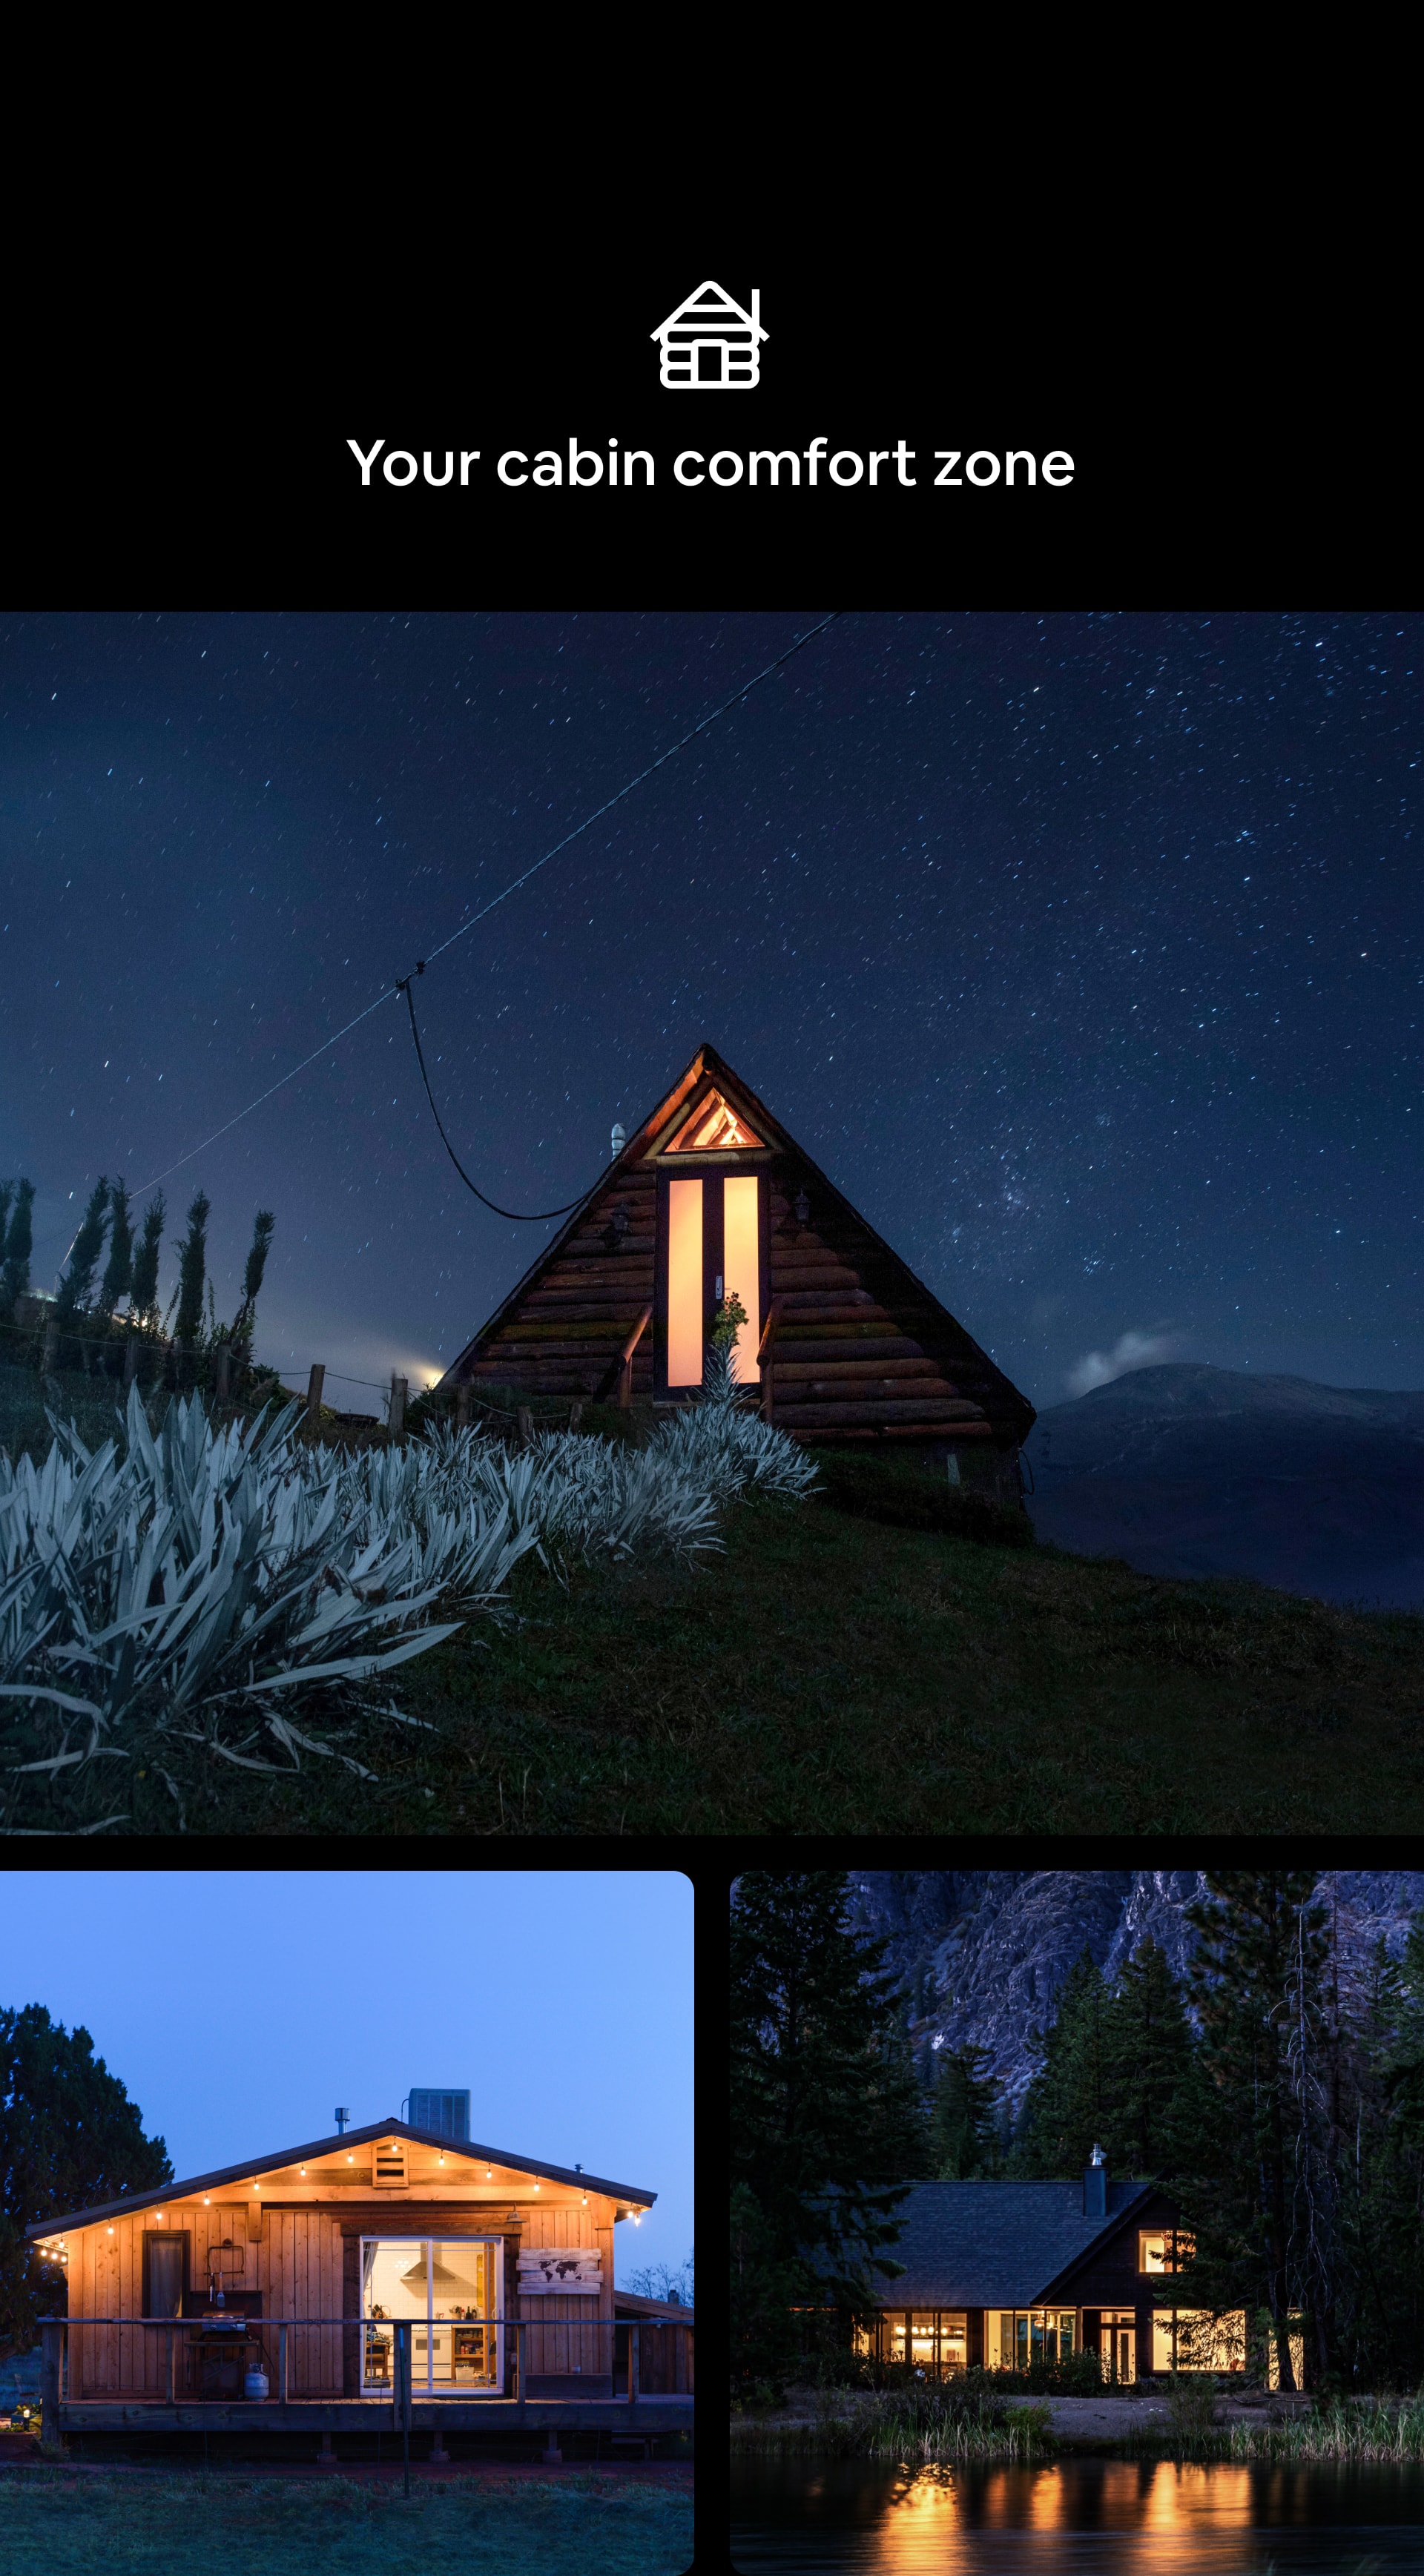 Cabin Category icon Your cabin comfort zone A tryptic of nighttime, outdoor images. First image captures an A-frame style cabin with large, brightly-lit windows against a stunning, star-filled sky. Second image features a cabin wrapped with a large porch whose interior and exterior lighting glows against a moonlit sky. Third image is of a cabin in the woods whose internal lighting illuminates its many windows.